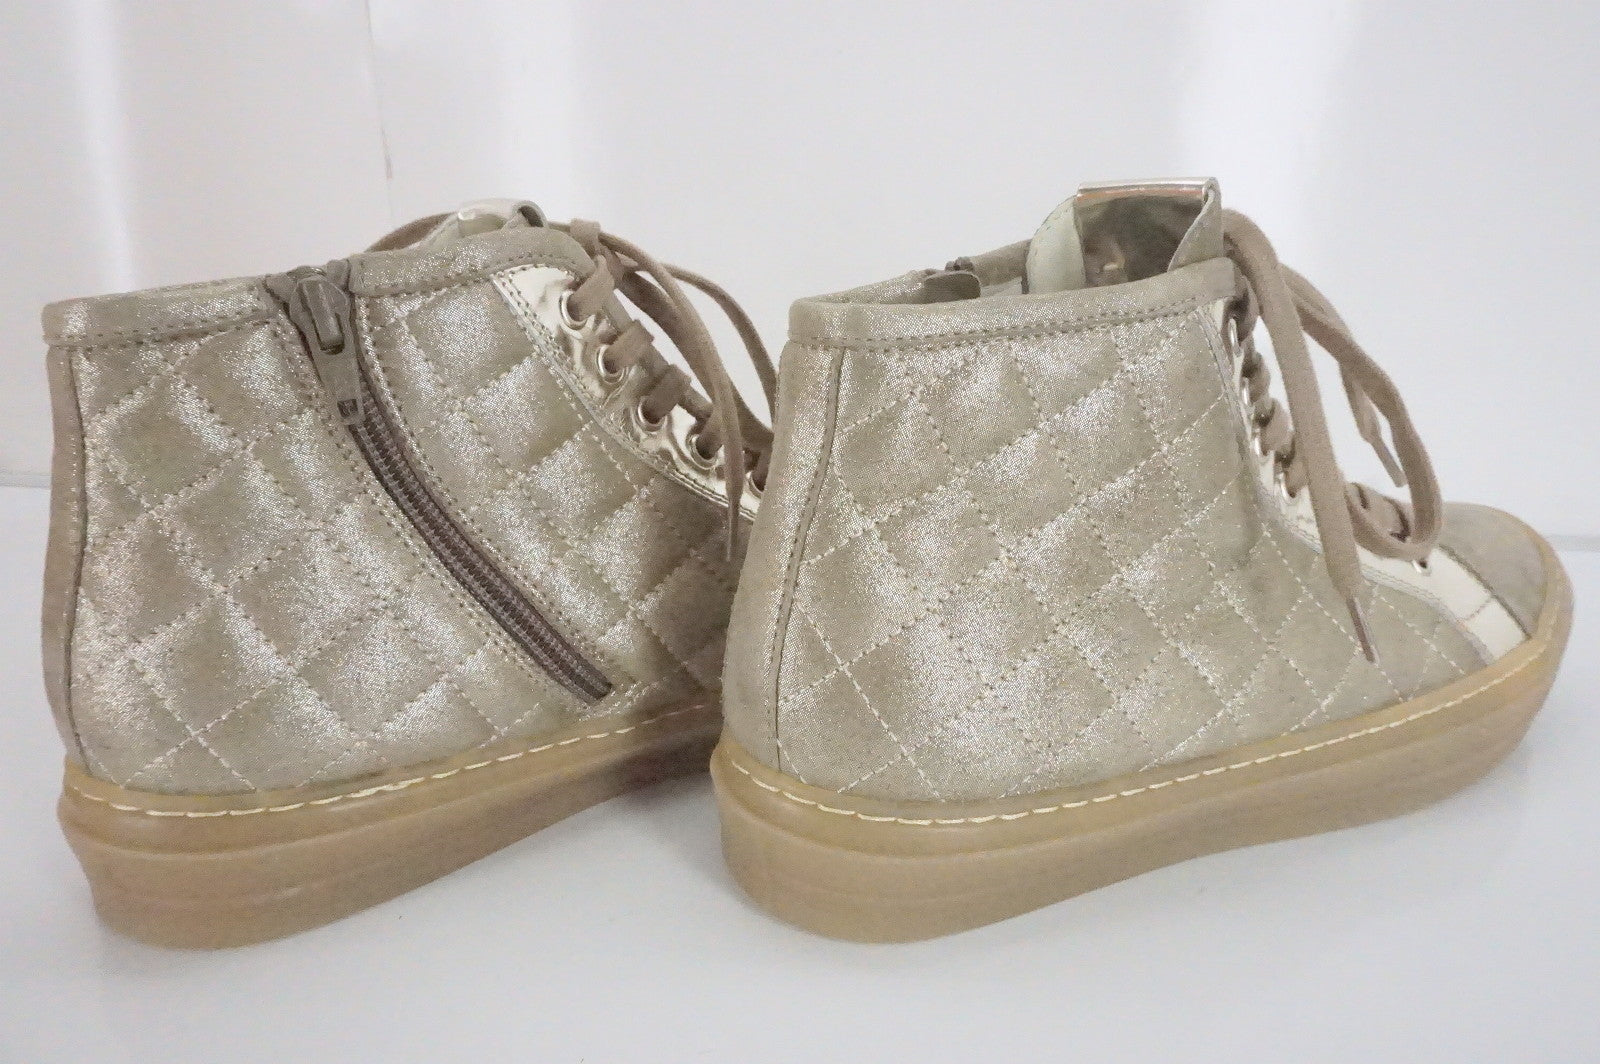 Attilio Giusti Leombruni Quilted Suede Ginger High Top Sneaker Size 38.5 NIB AGL